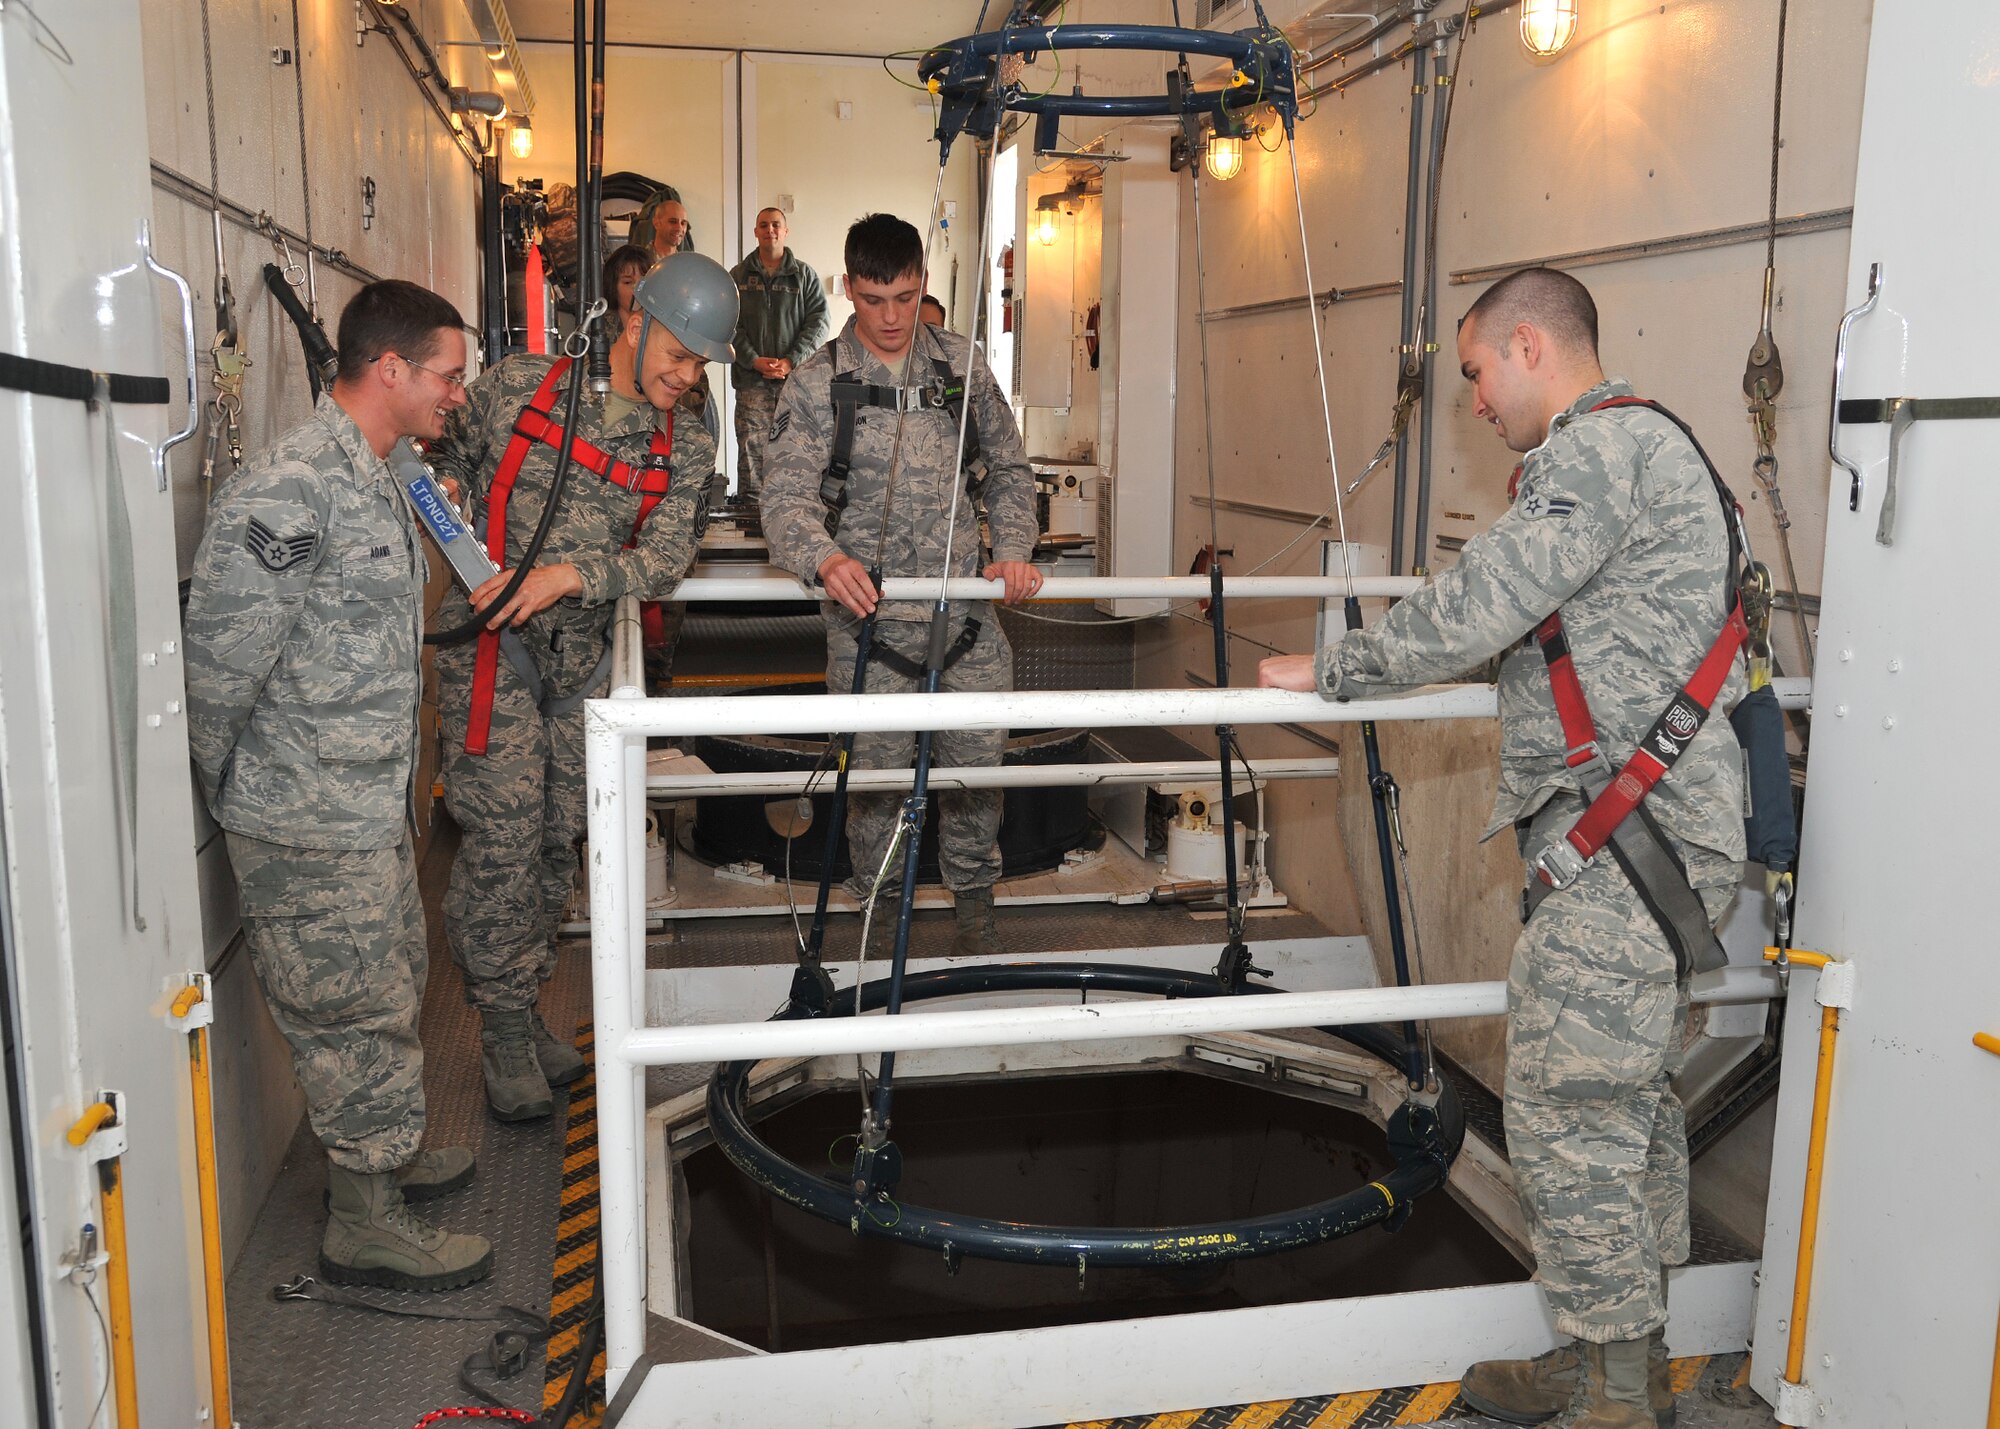 Chief Master Sergeant of the Air Force James Roy operates the hoist inside a Minuteman Payload Transporter III van, Nov. 20 at the T-9 maintenance trainer. Staff Sgts. Michael Adams and Michael Johnson, 341st Maintenance Operations Squadron team trainers, and Airman 1st Class Thomas Dekowski, a 341st Missile Maintenance Squadron tool room technician, observe and prepare to stow reentry system handling gear for transport. (U.S. Air Force photo/John Turner)